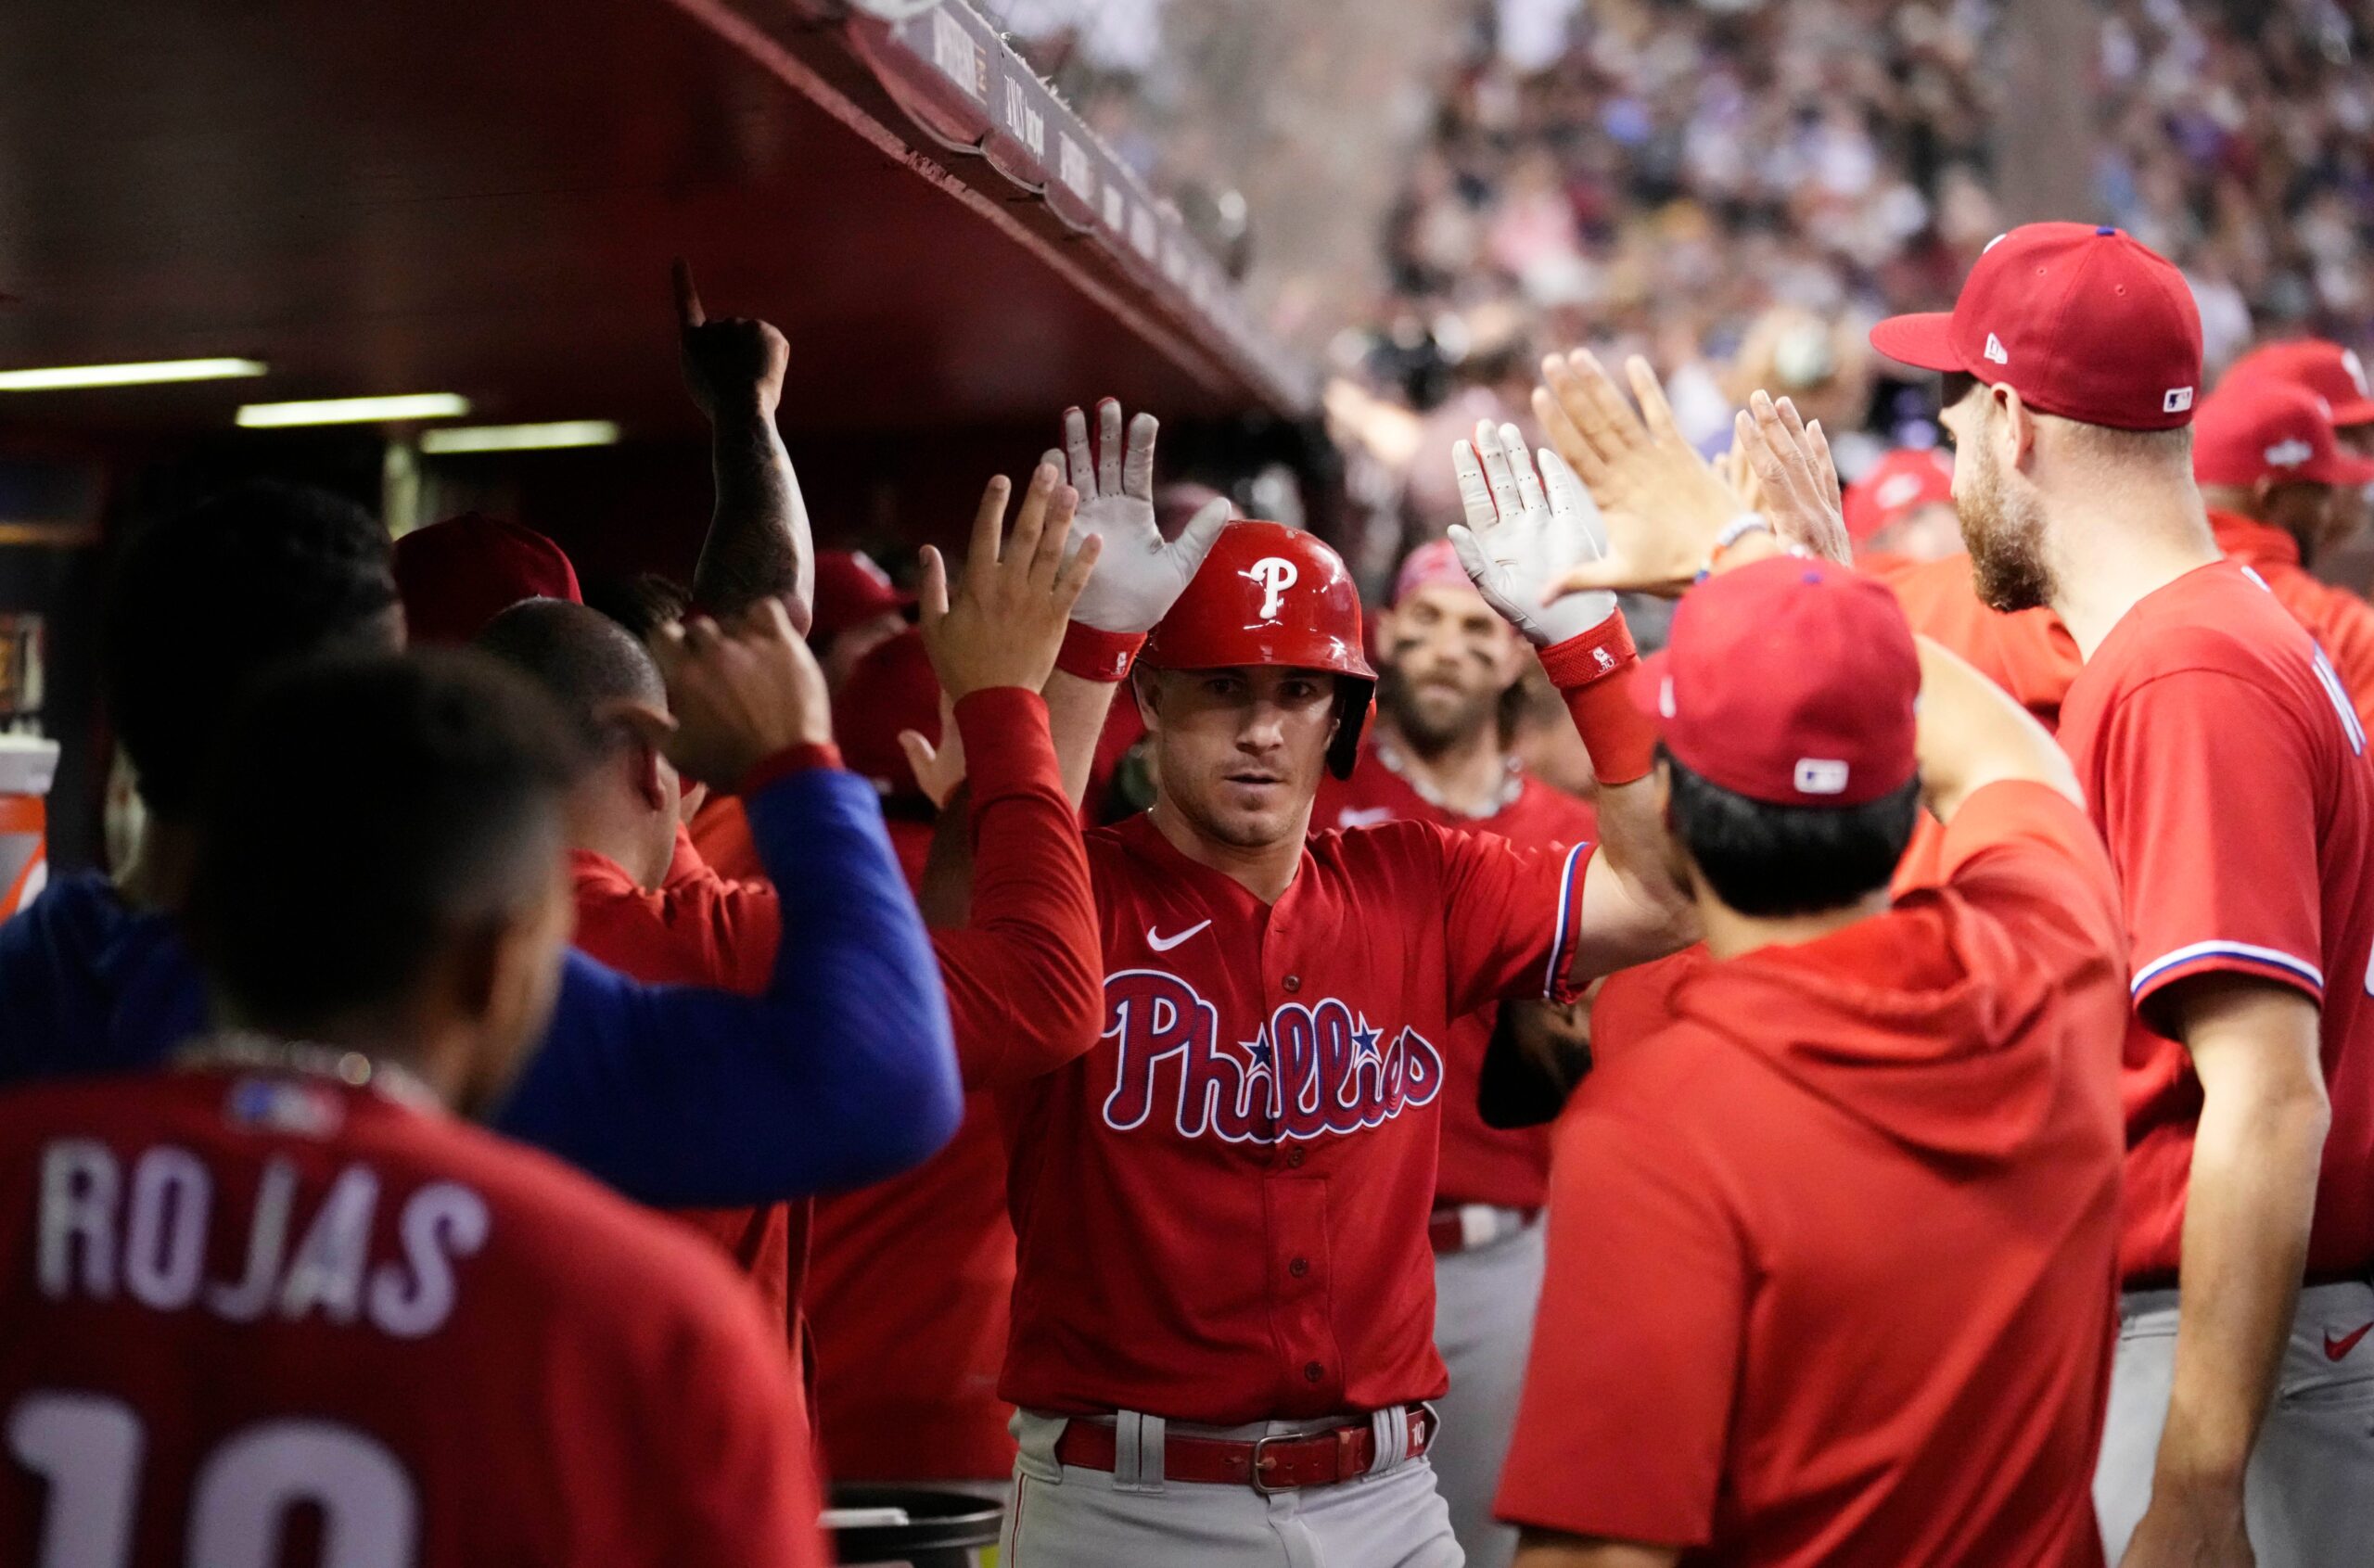 Canadian manager Rob Thomson leads Phillies to 1st playoff berth since 2011